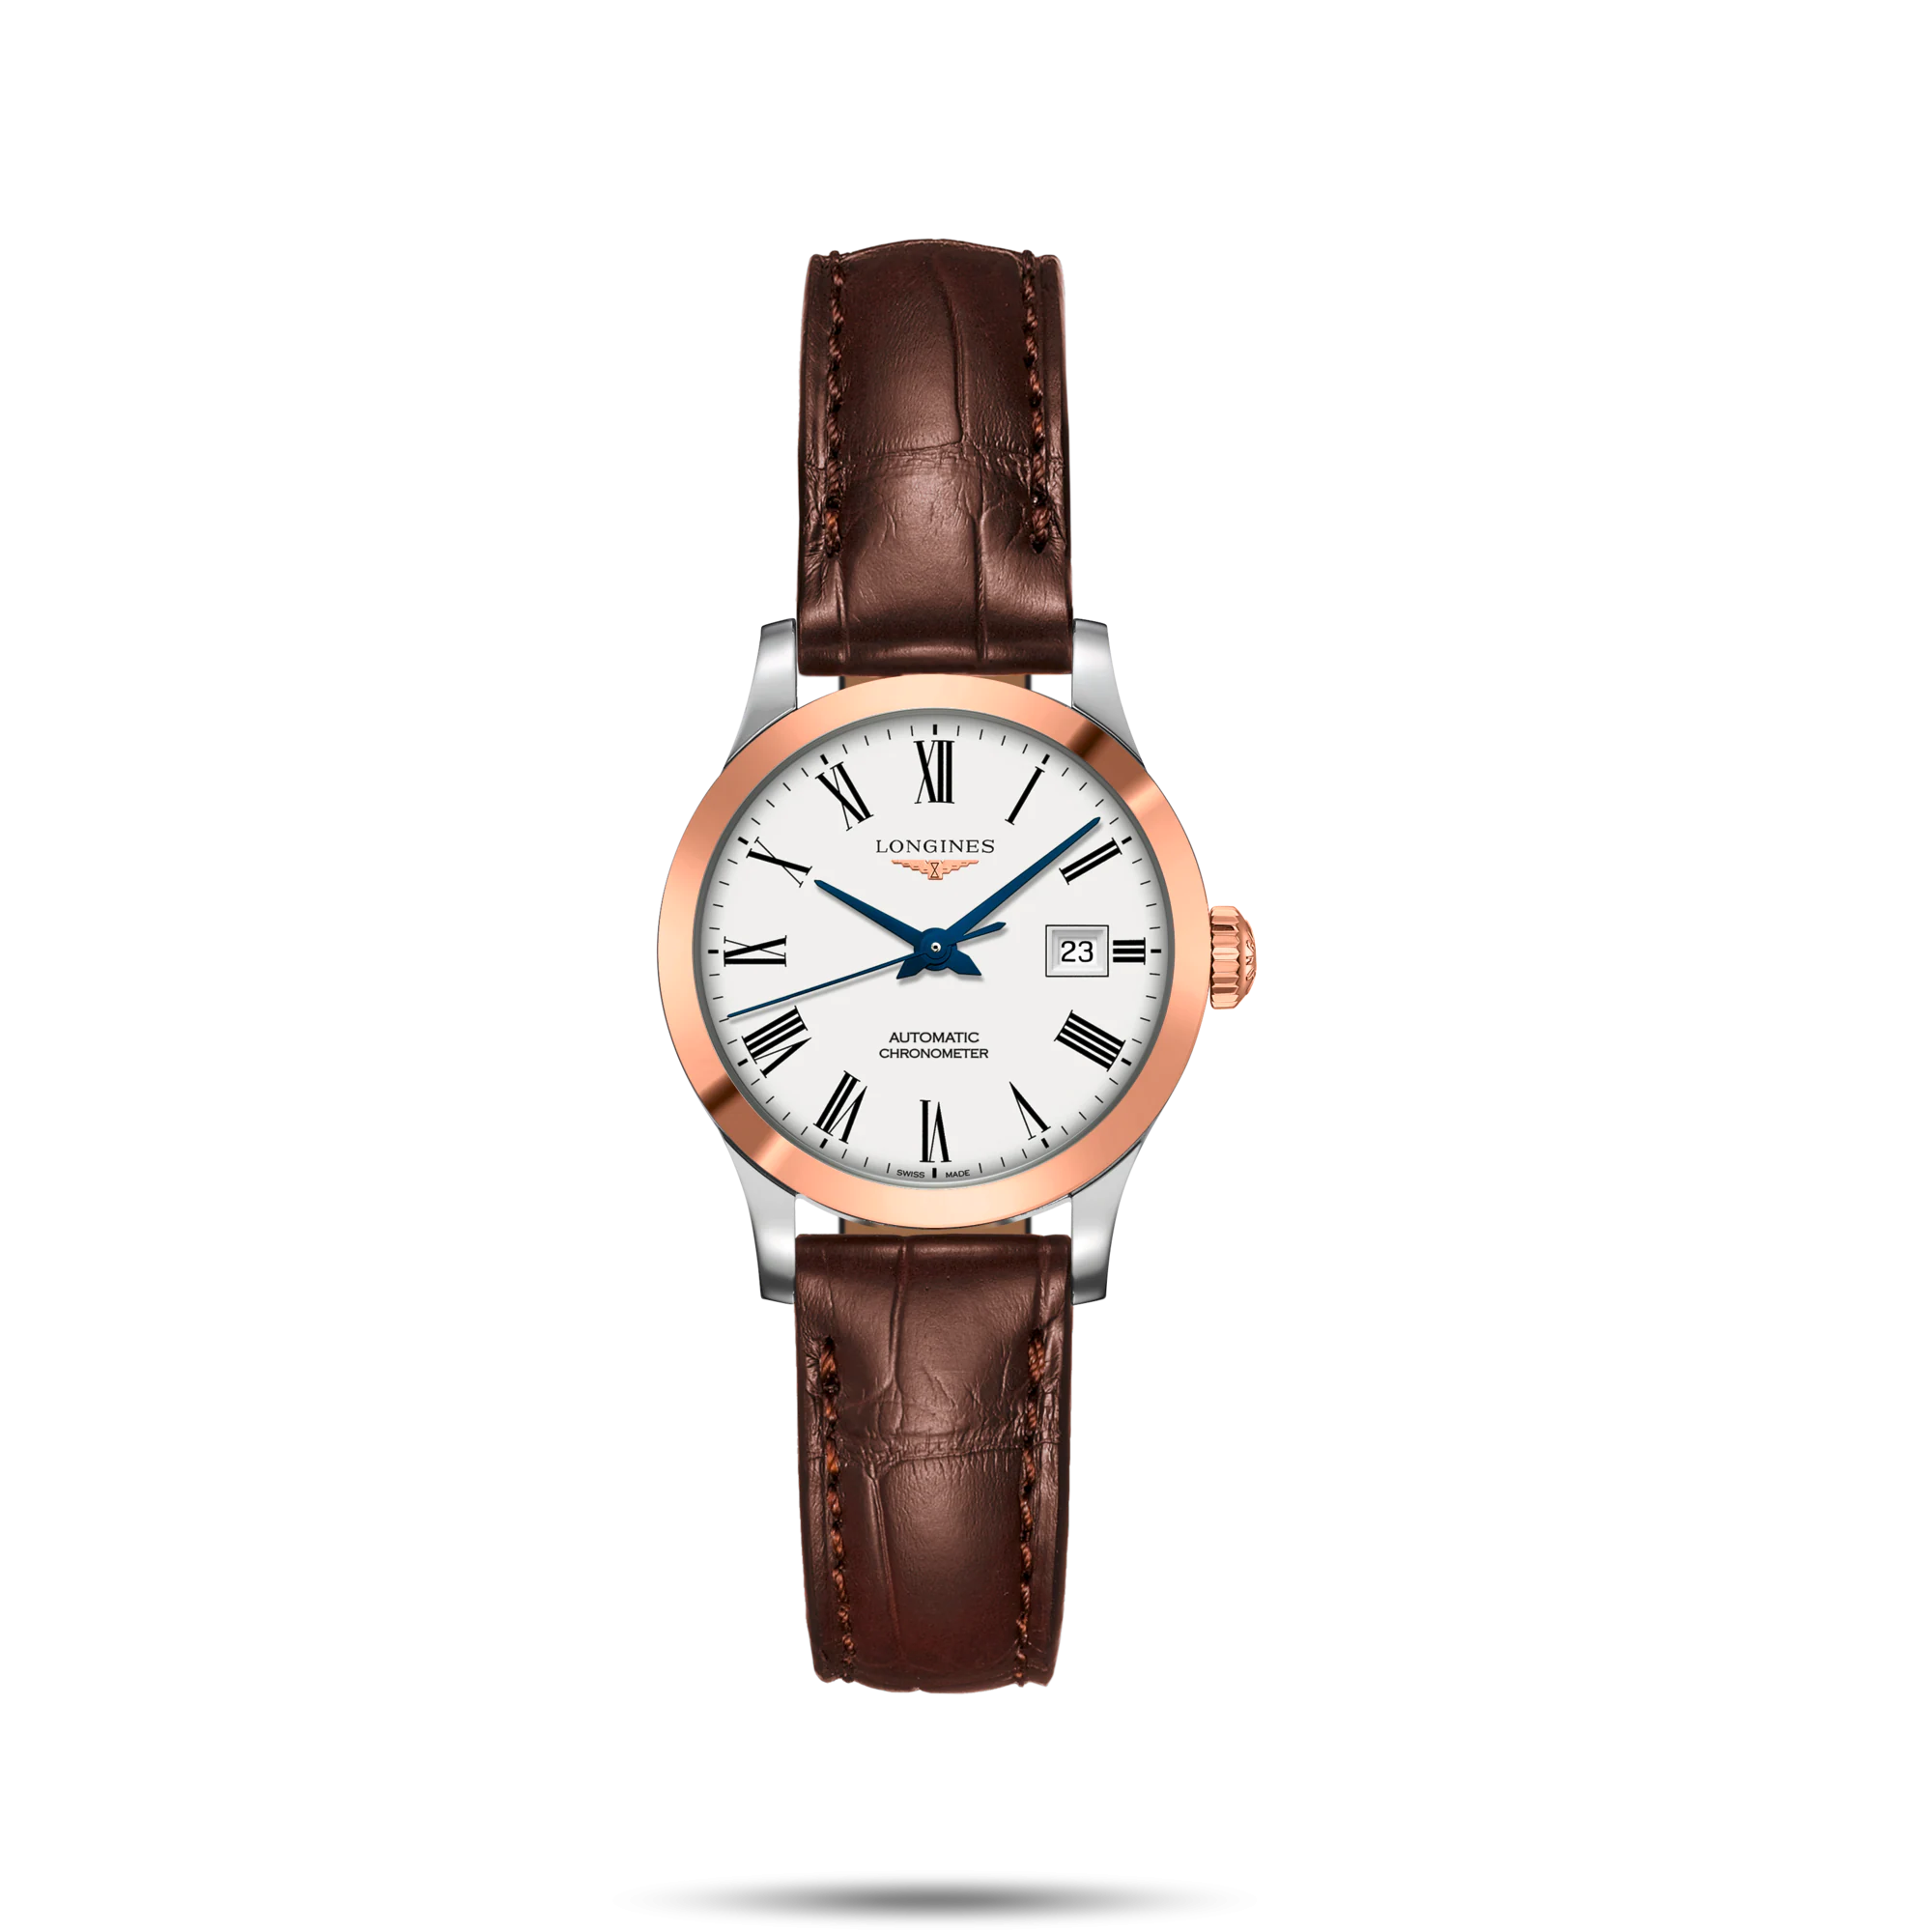 Ladies' watch  LONGINES, Record Collection / 30mm, SKU: L2.321.5.11.2 | watchapproach.com